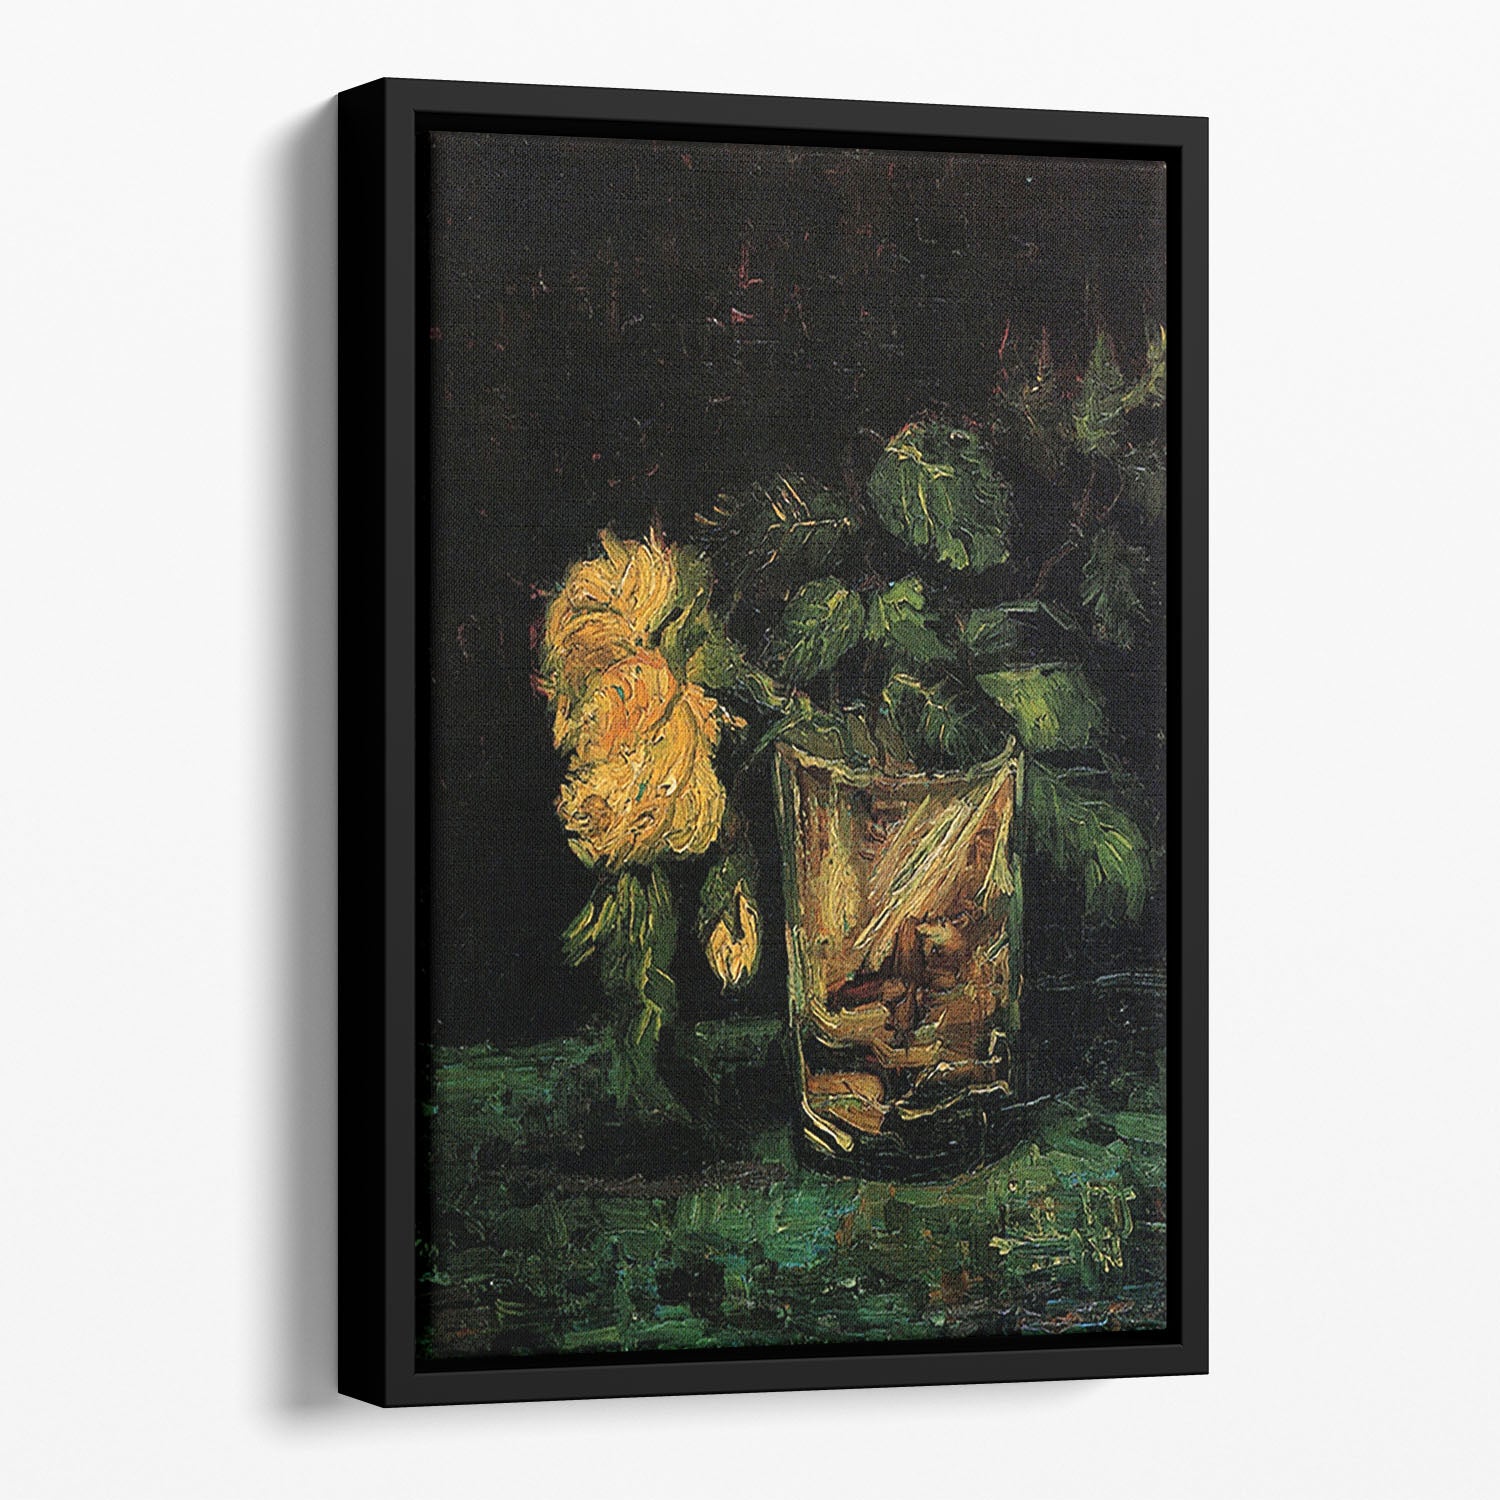 Glass with Roses by Van Gogh Floating Framed Canvas